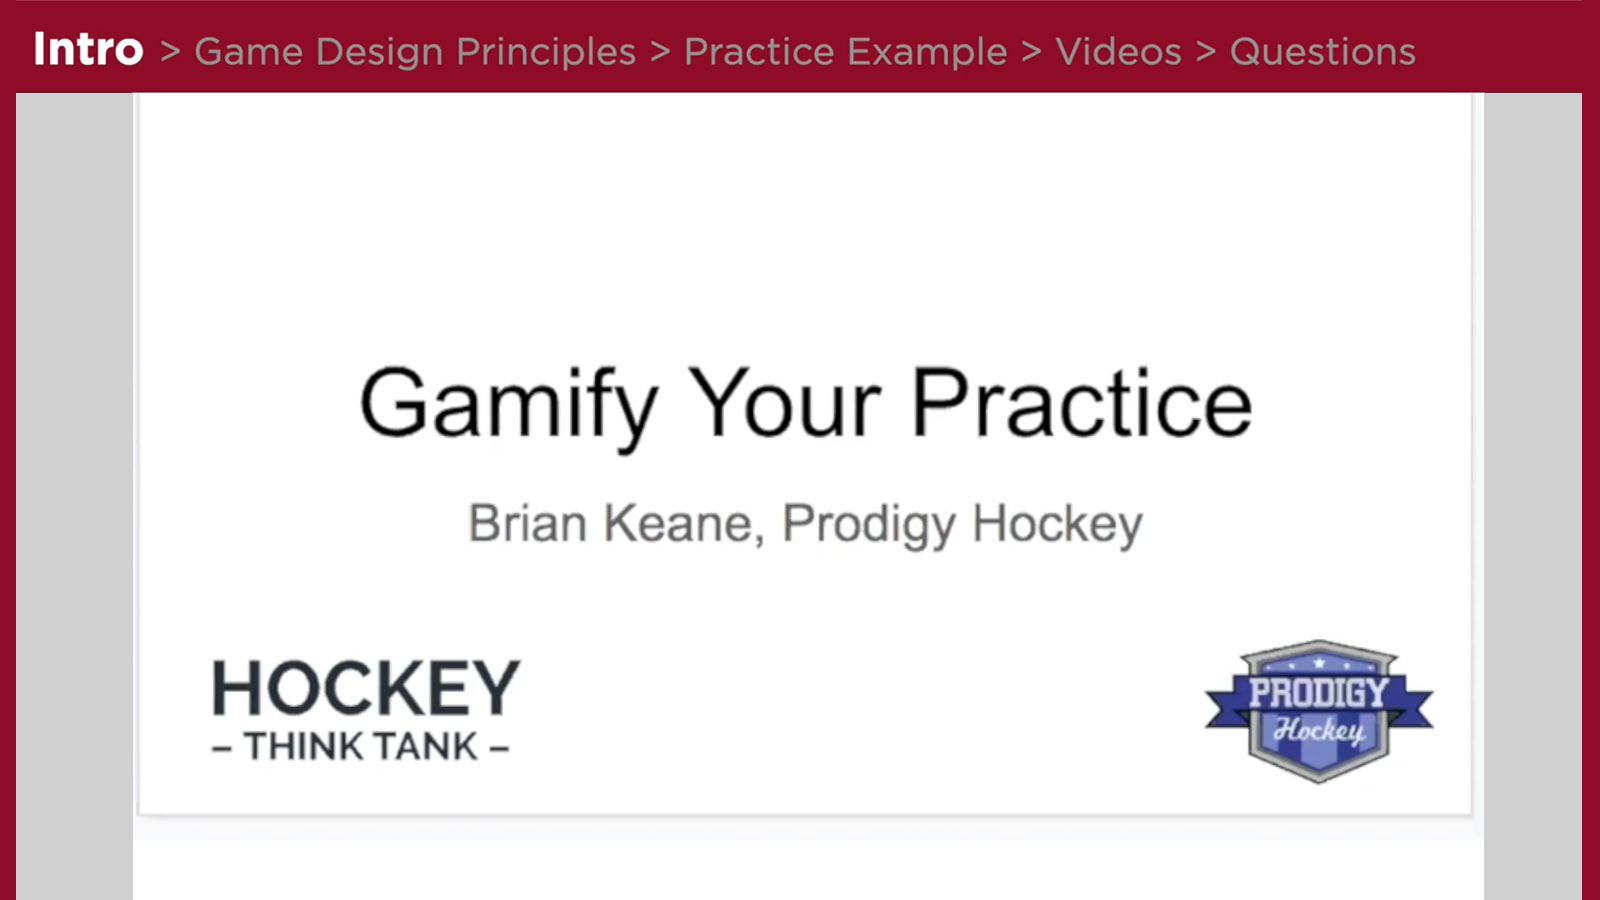 Gamify Your Practice